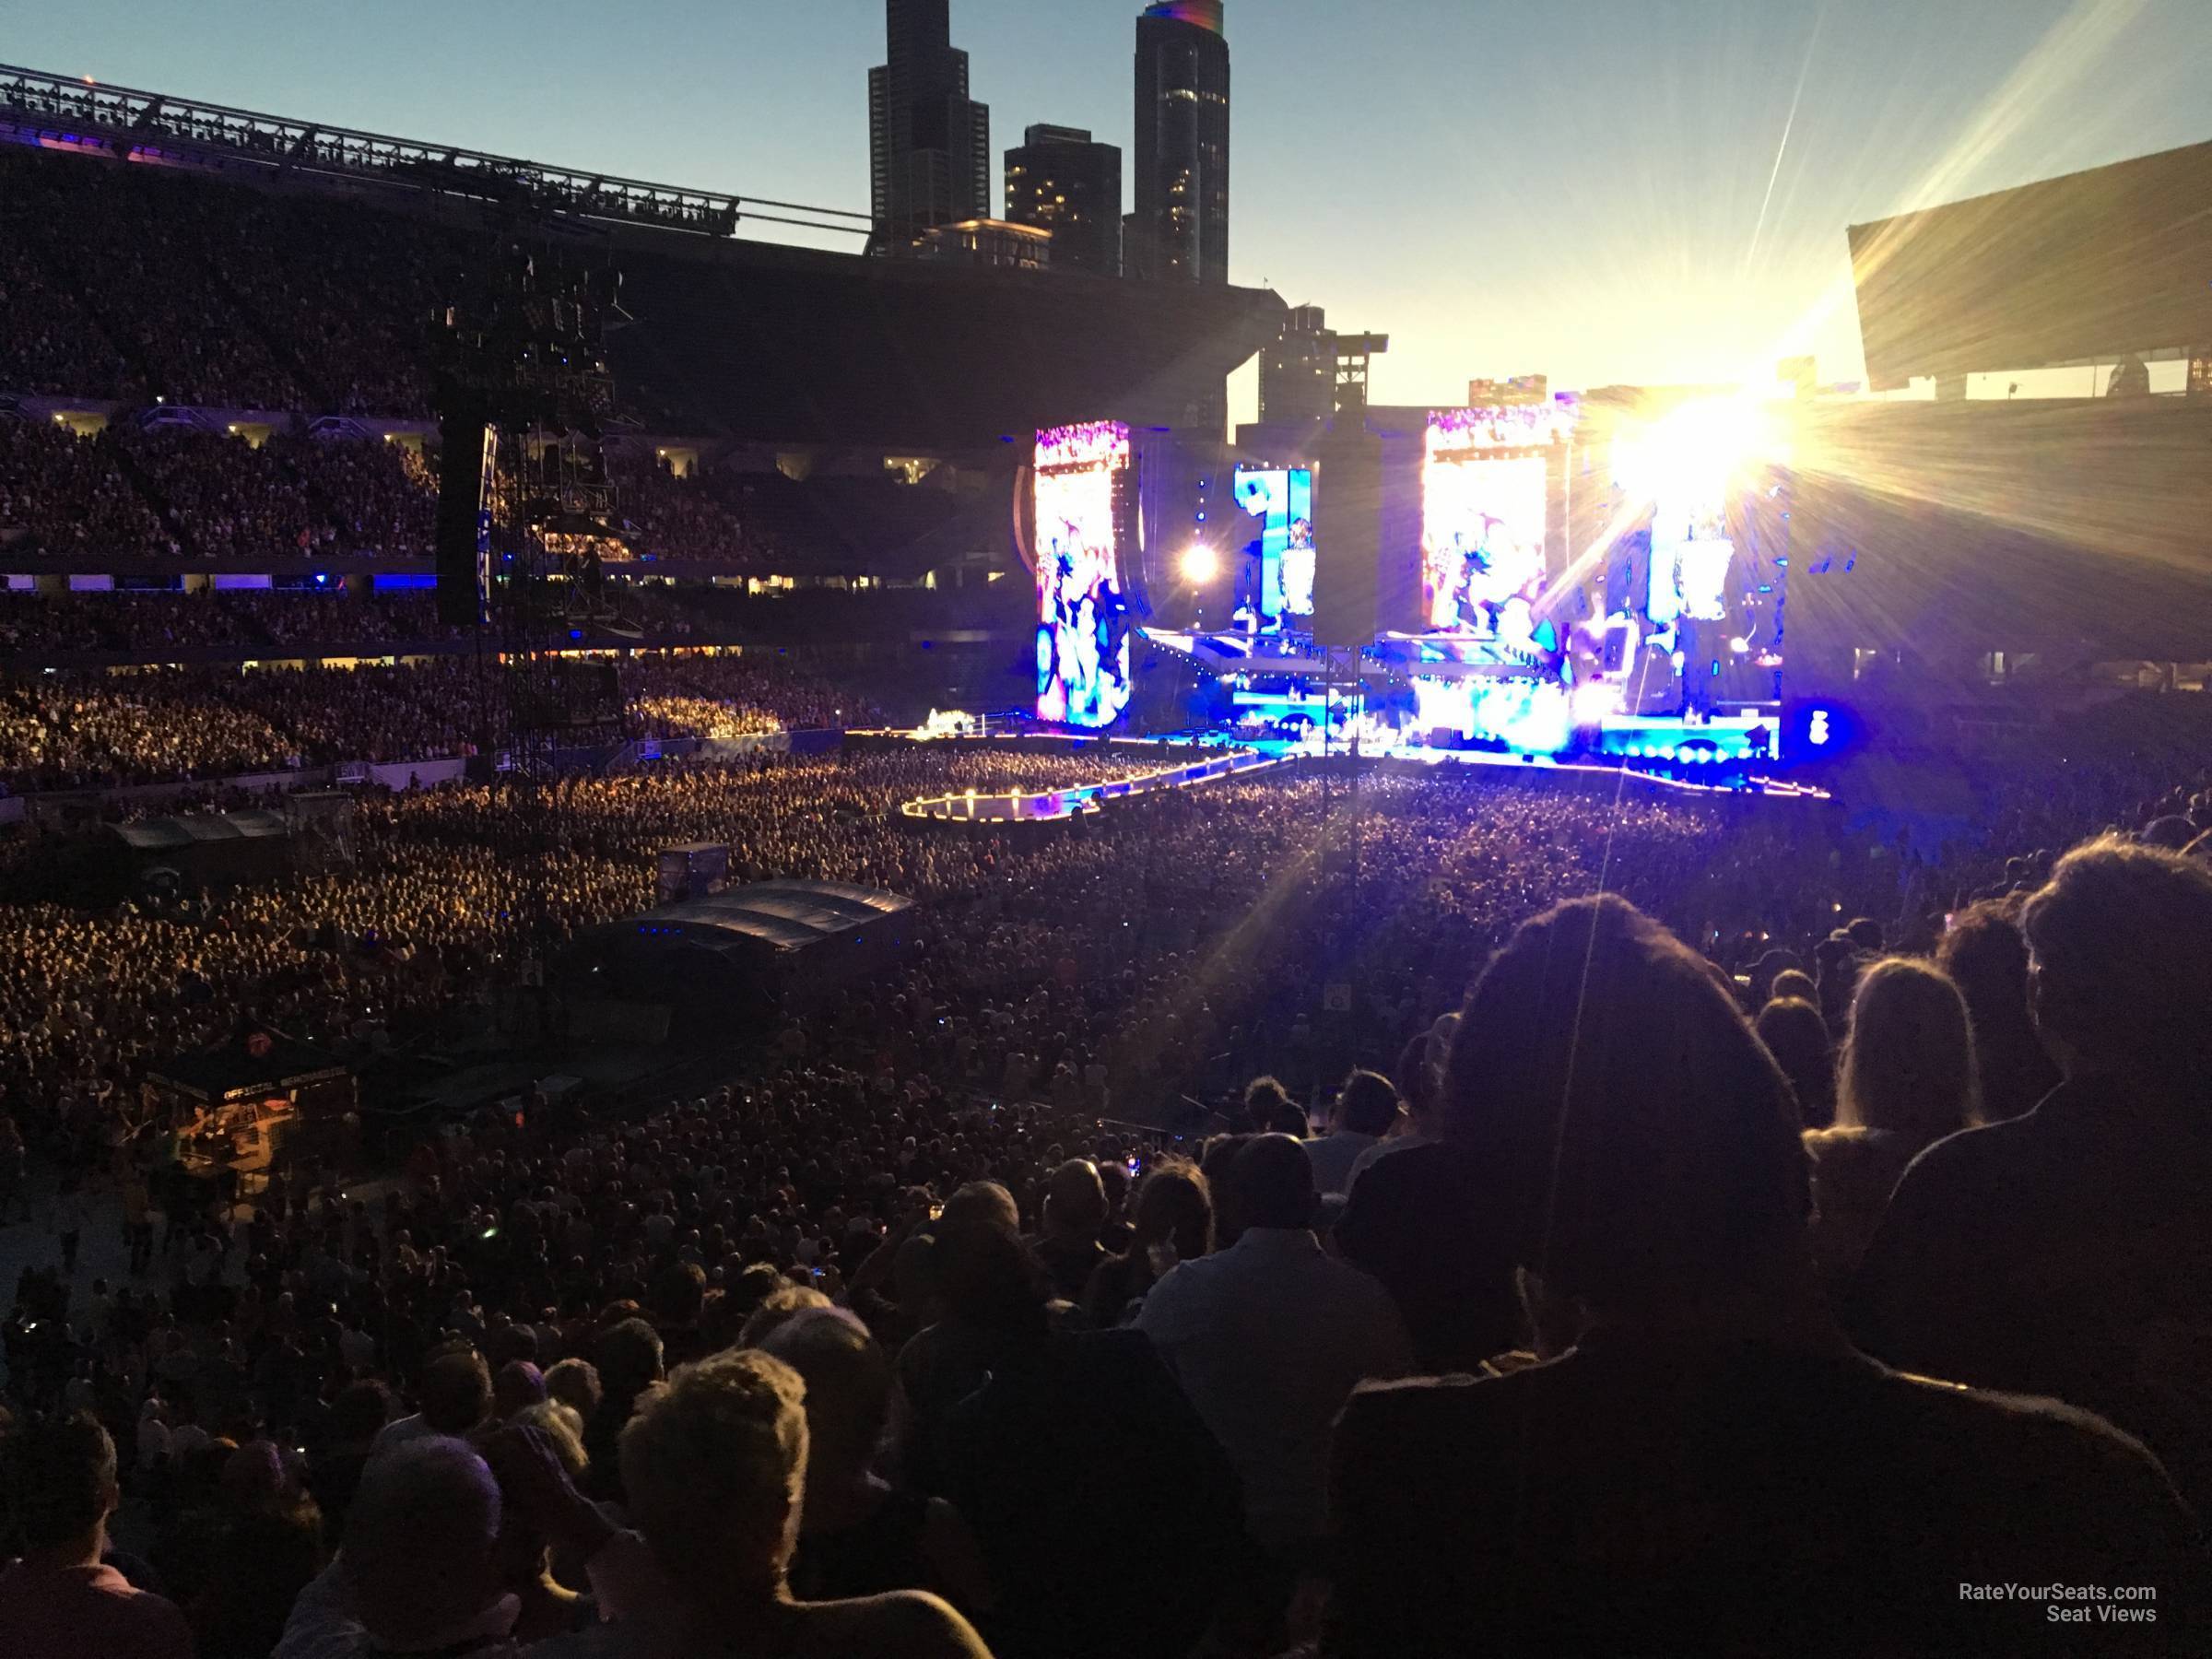 section 214, row 10 seat view  for concert - soldier field